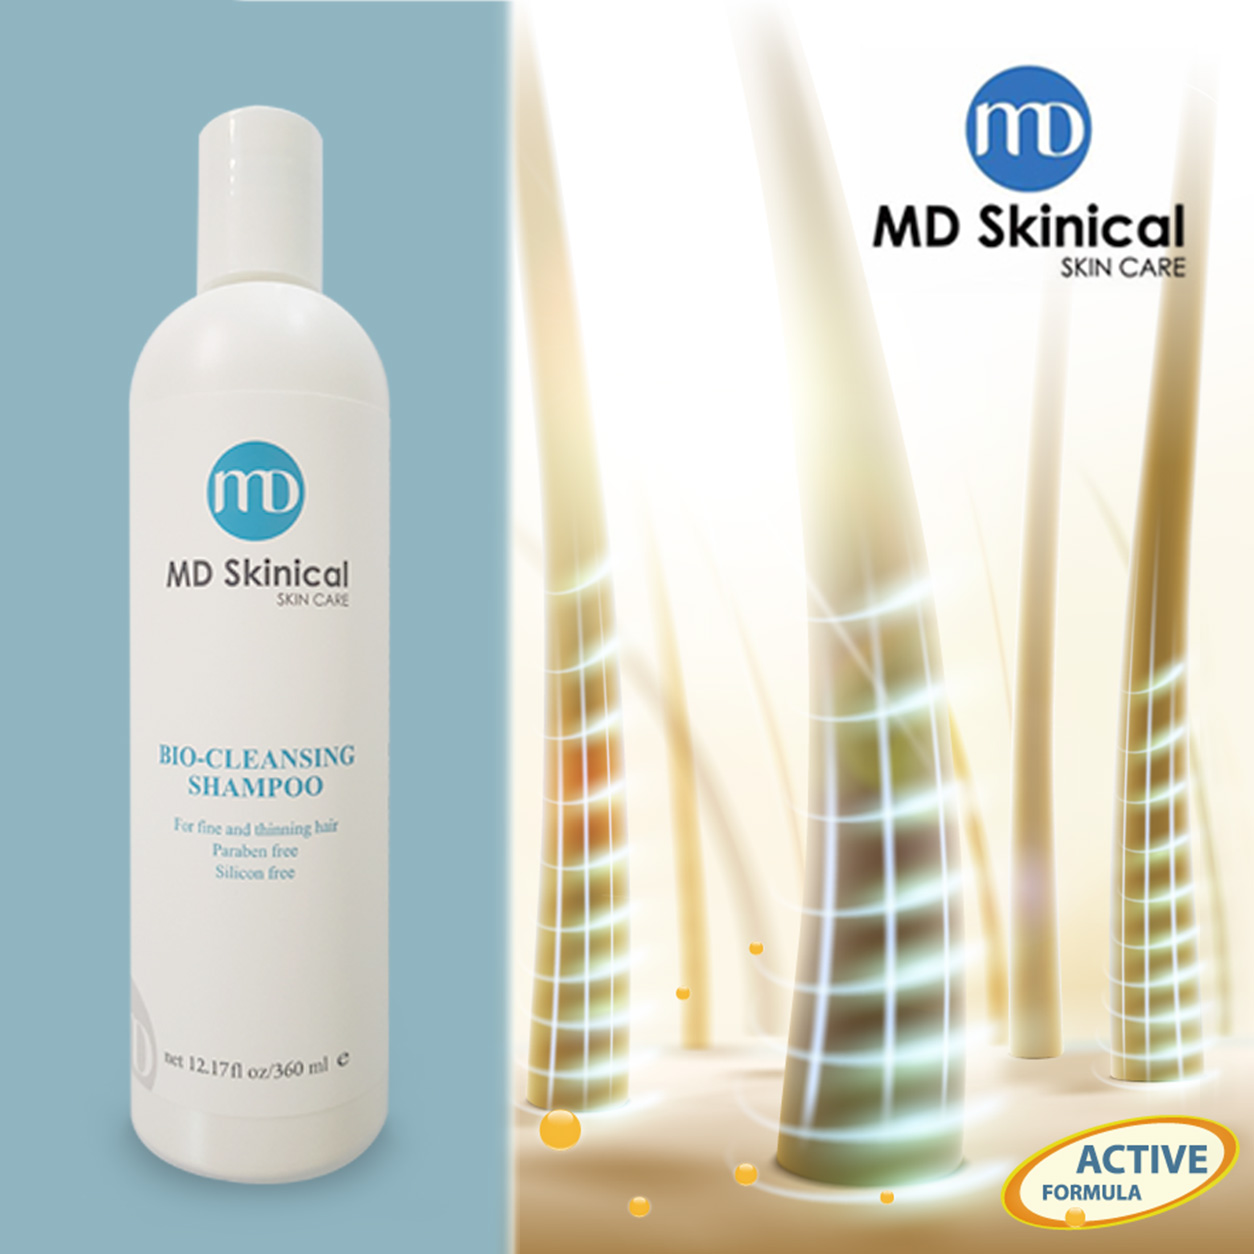     
    <p style="font-size:14px; margin-top:20px;">4/2/2018</p>
    
    <p style="font-size:20px;" >MD SKinical BIO CLEANING SHAMPOO</p>
    
    <p style="font-size:15px;">multiple DHT blockers, preventing damage and hair loss. Natural, botanical oils and extracts add volume, texture and shine to thinning hair. </p>